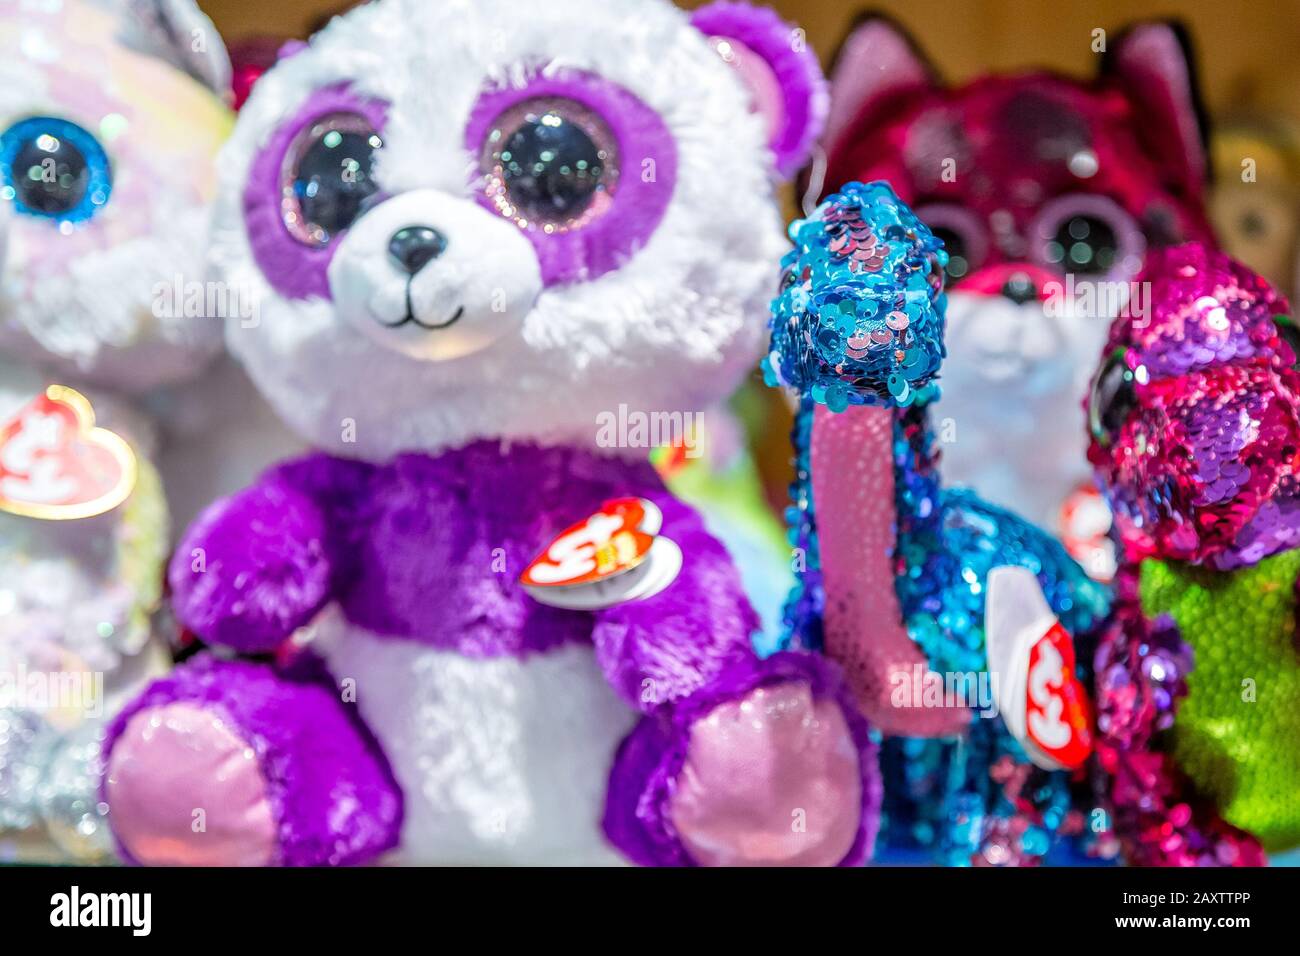 Brunico (BZ), February 12, 2019: light is enlightening puppets for sale in shop Stock Photo